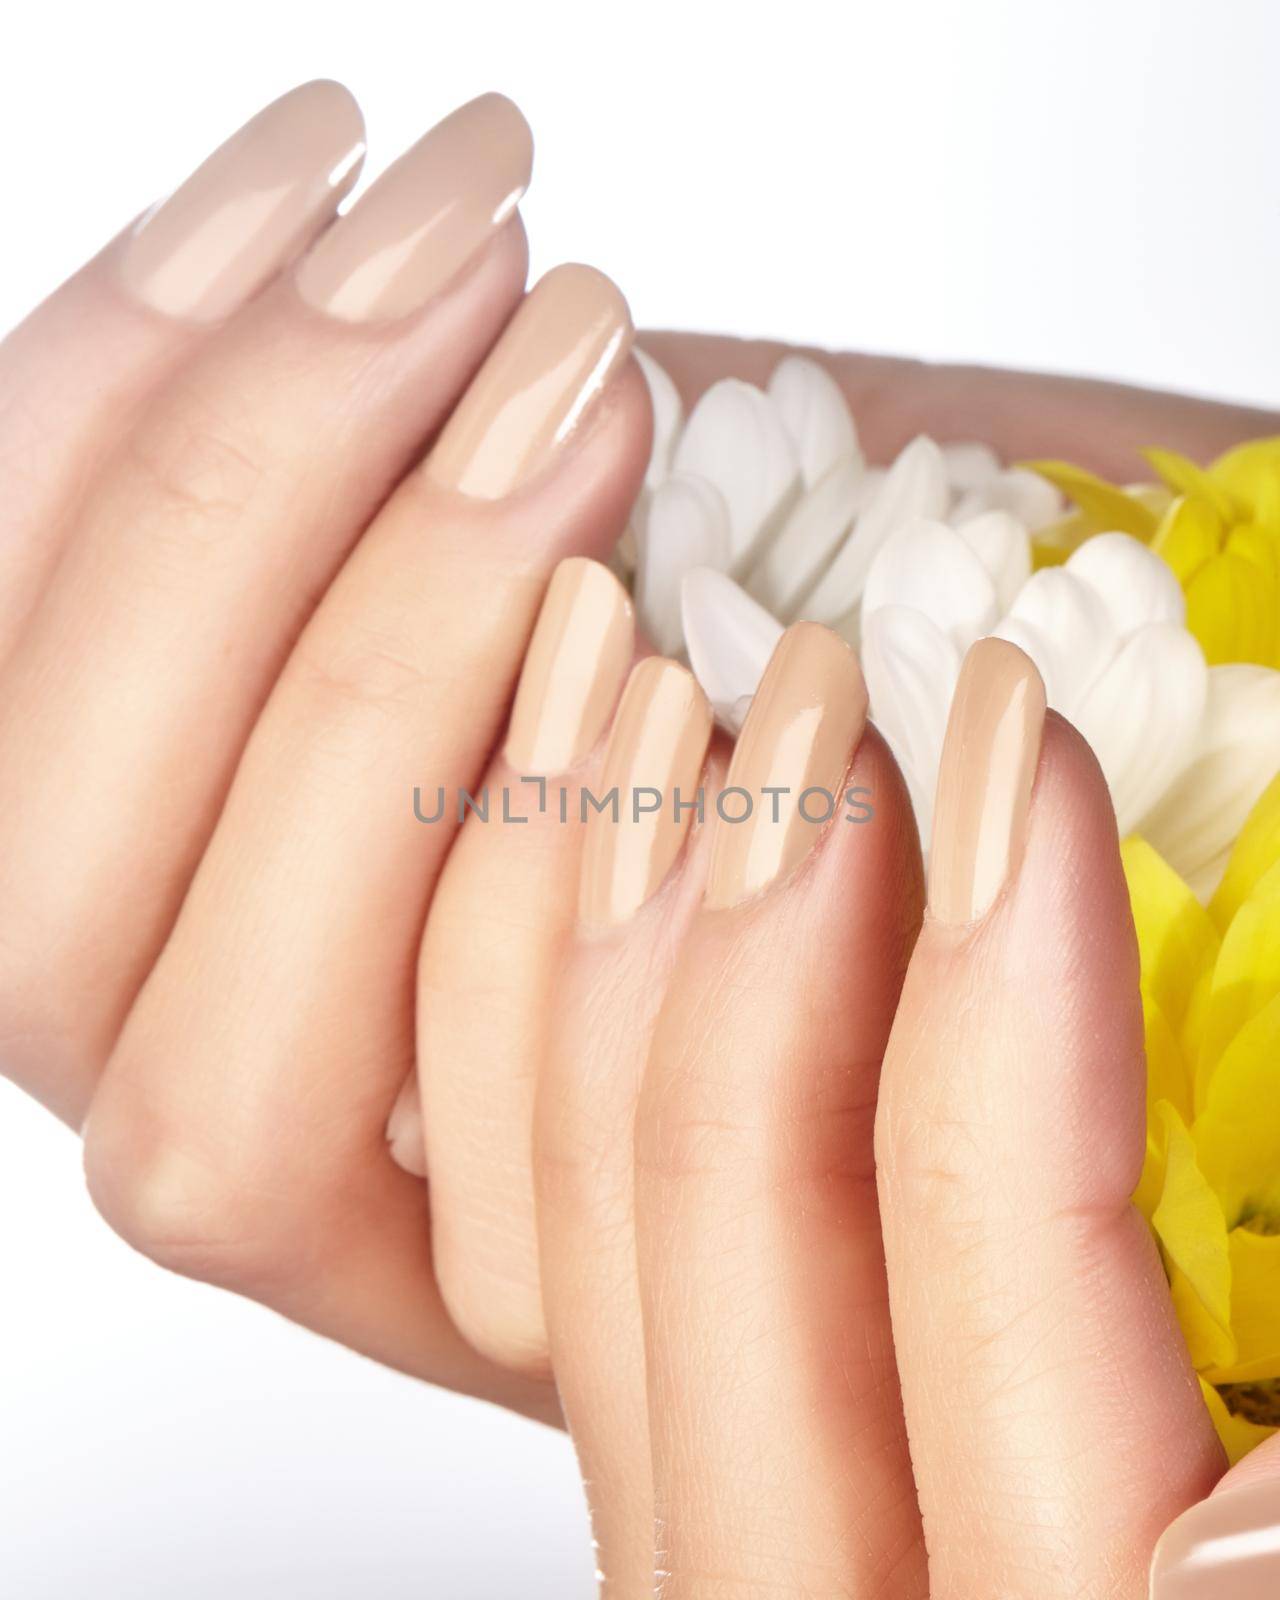 Manicured nails with natural nail polish. Manicure with beige nailpolish. Fashion manicure. Shiny gel lacquer. Spring style